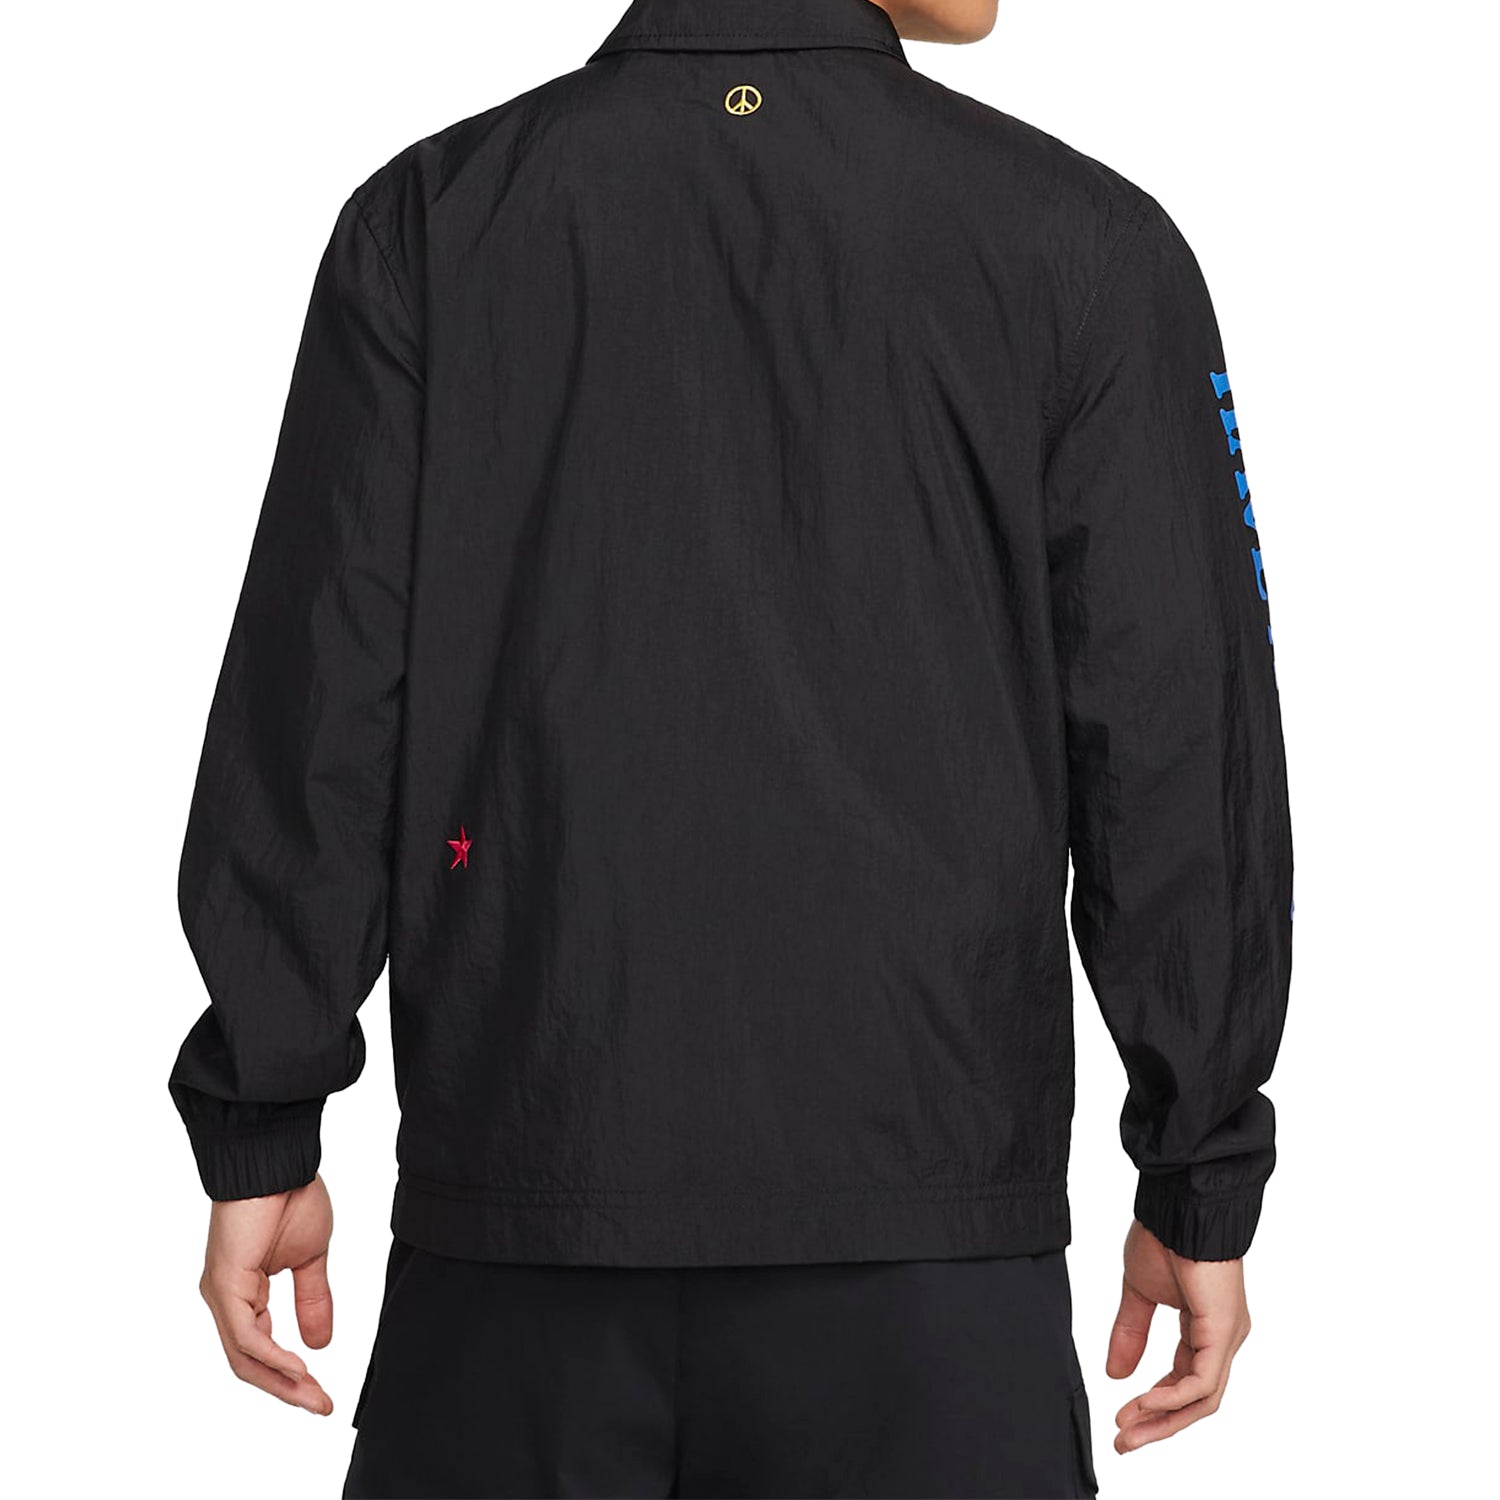 Nike Sportswear Have A Nike Day Snap-front Coaches Jacket Mens Style : Dm5055